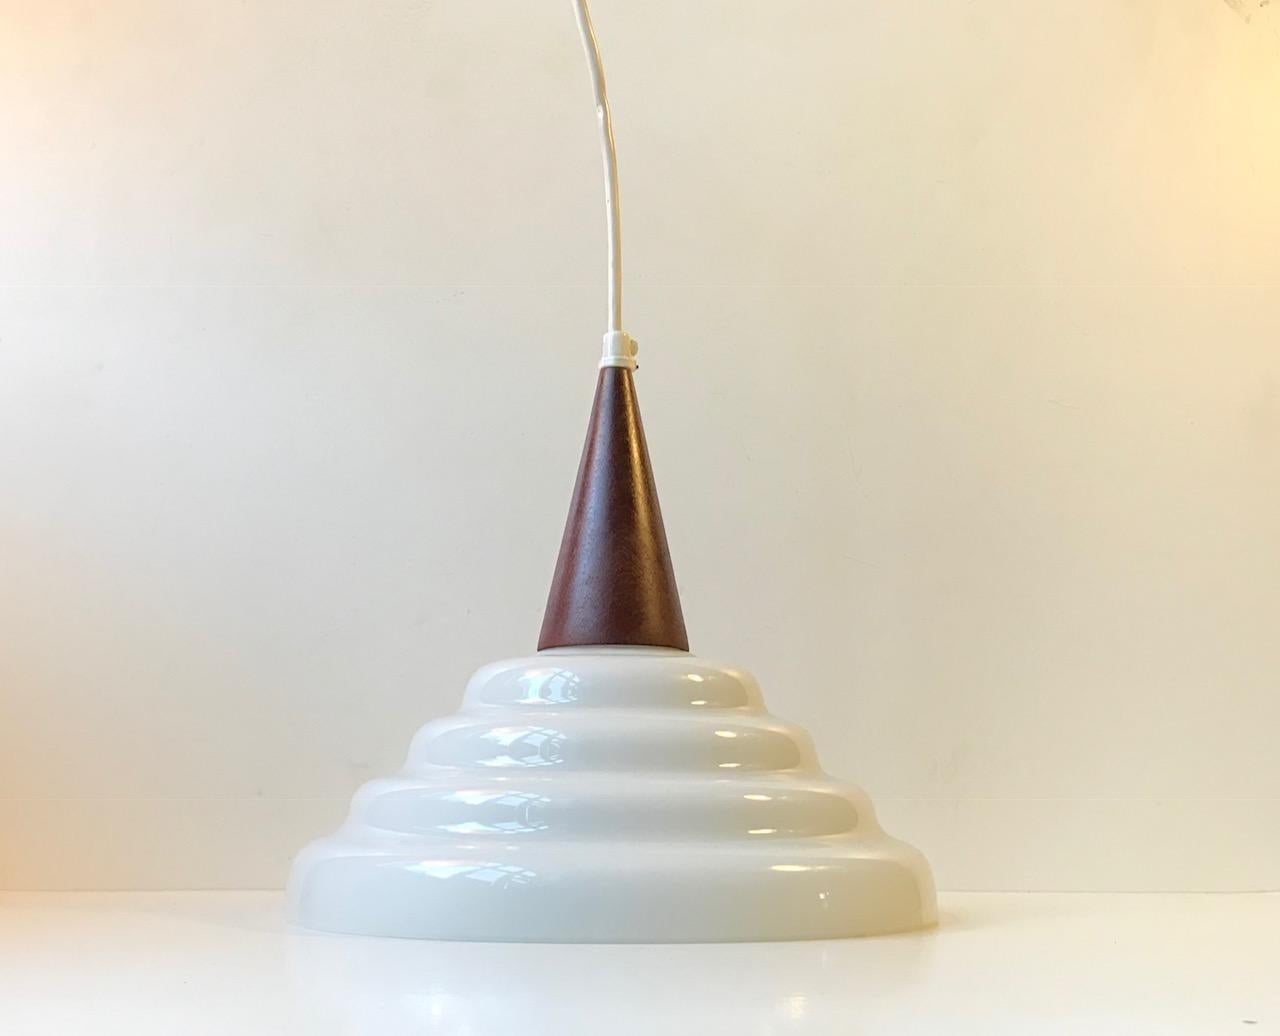 - Curvy Swedish ceiling light in fluted white opaline glass with a top in solid teak
- Design in a style reminiscent of Lisa Johansson-Pape's works
- It is fitted with an E27 light bulb
- 3 meters new white wire and it is in working order.